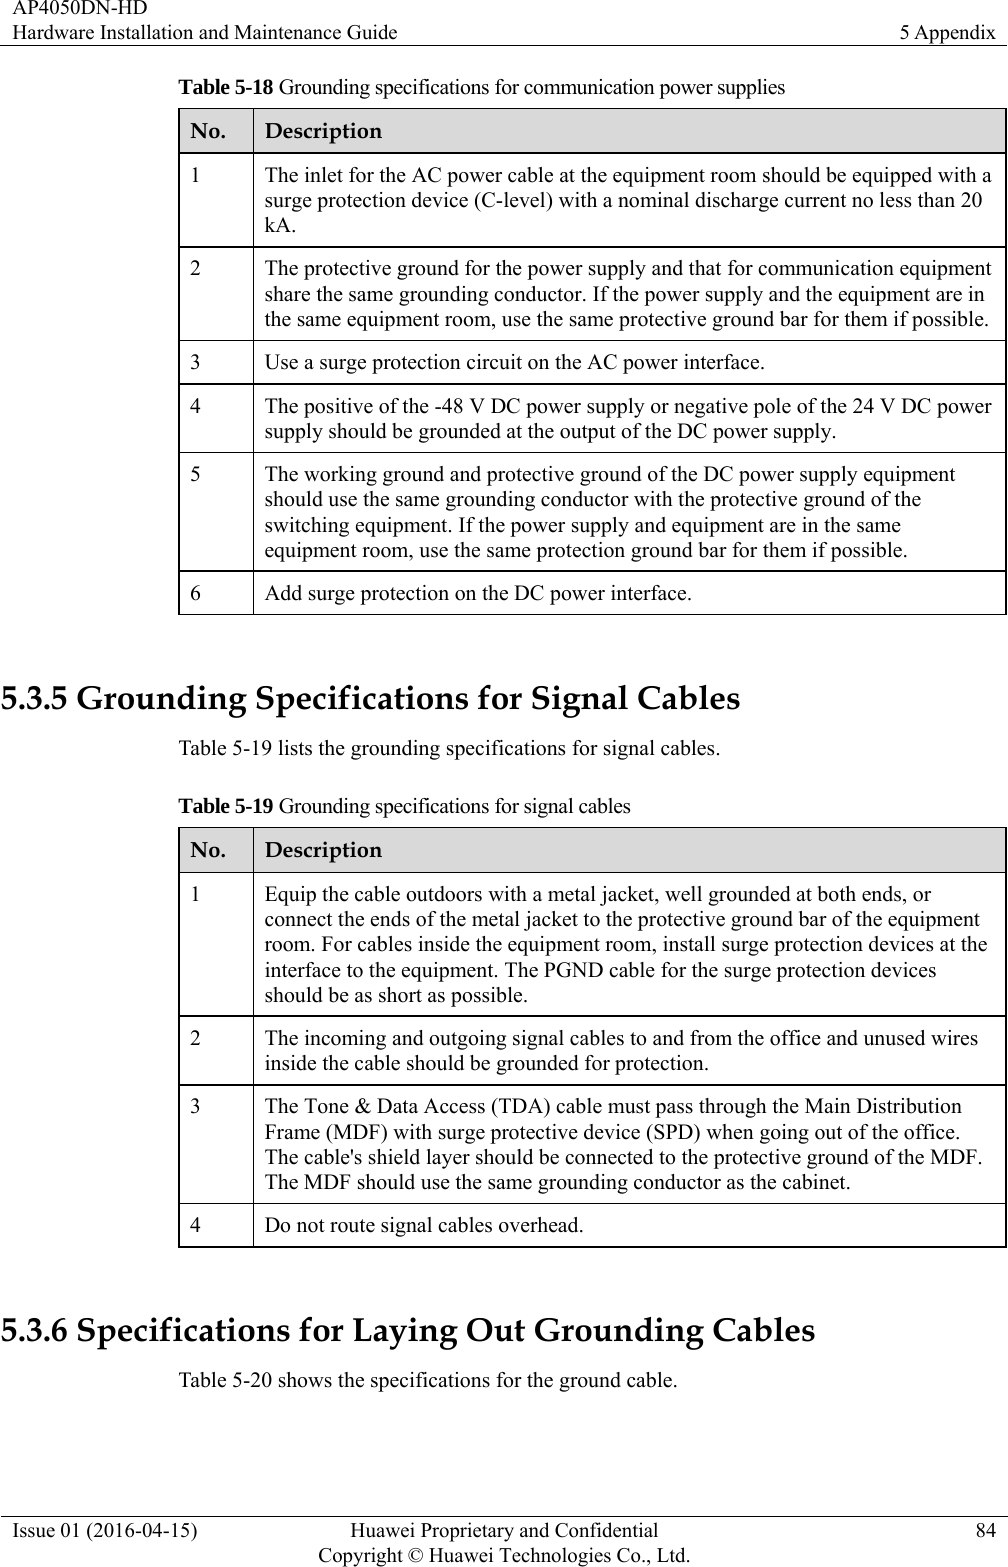 AP4050DN-HD Hardware Installation and Maintenance Guide  5 Appendix Issue 01 (2016-04-15)  Huawei Proprietary and Confidential         Copyright © Huawei Technologies Co., Ltd.84 Table 5-18 Grounding specifications for communication power supplies No.  Description 1  The inlet for the AC power cable at the equipment room should be equipped with a surge protection device (C-level) with a nominal discharge current no less than 20 kA. 2  The protective ground for the power supply and that for communication equipment share the same grounding conductor. If the power supply and the equipment are in the same equipment room, use the same protective ground bar for them if possible.3  Use a surge protection circuit on the AC power interface. 4  The positive of the -48 V DC power supply or negative pole of the 24 V DC power supply should be grounded at the output of the DC power supply. 5  The working ground and protective ground of the DC power supply equipment should use the same grounding conductor with the protective ground of the switching equipment. If the power supply and equipment are in the same equipment room, use the same protection ground bar for them if possible. 6  Add surge protection on the DC power interface.  5.3.5 Grounding Specifications for Signal Cables Table 5-19 lists the grounding specifications for signal cables. Table 5-19 Grounding specifications for signal cables No.  Description 1  Equip the cable outdoors with a metal jacket, well grounded at both ends, or connect the ends of the metal jacket to the protective ground bar of the equipment room. For cables inside the equipment room, install surge protection devices at the interface to the equipment. The PGND cable for the surge protection devices should be as short as possible. 2  The incoming and outgoing signal cables to and from the office and unused wires inside the cable should be grounded for protection. 3  The Tone &amp; Data Access (TDA) cable must pass through the Main Distribution Frame (MDF) with surge protective device (SPD) when going out of the office. The cable&apos;s shield layer should be connected to the protective ground of the MDF. The MDF should use the same grounding conductor as the cabinet. 4  Do not route signal cables overhead.  5.3.6 Specifications for Laying Out Grounding Cables Table 5-20 shows the specifications for the ground cable. 